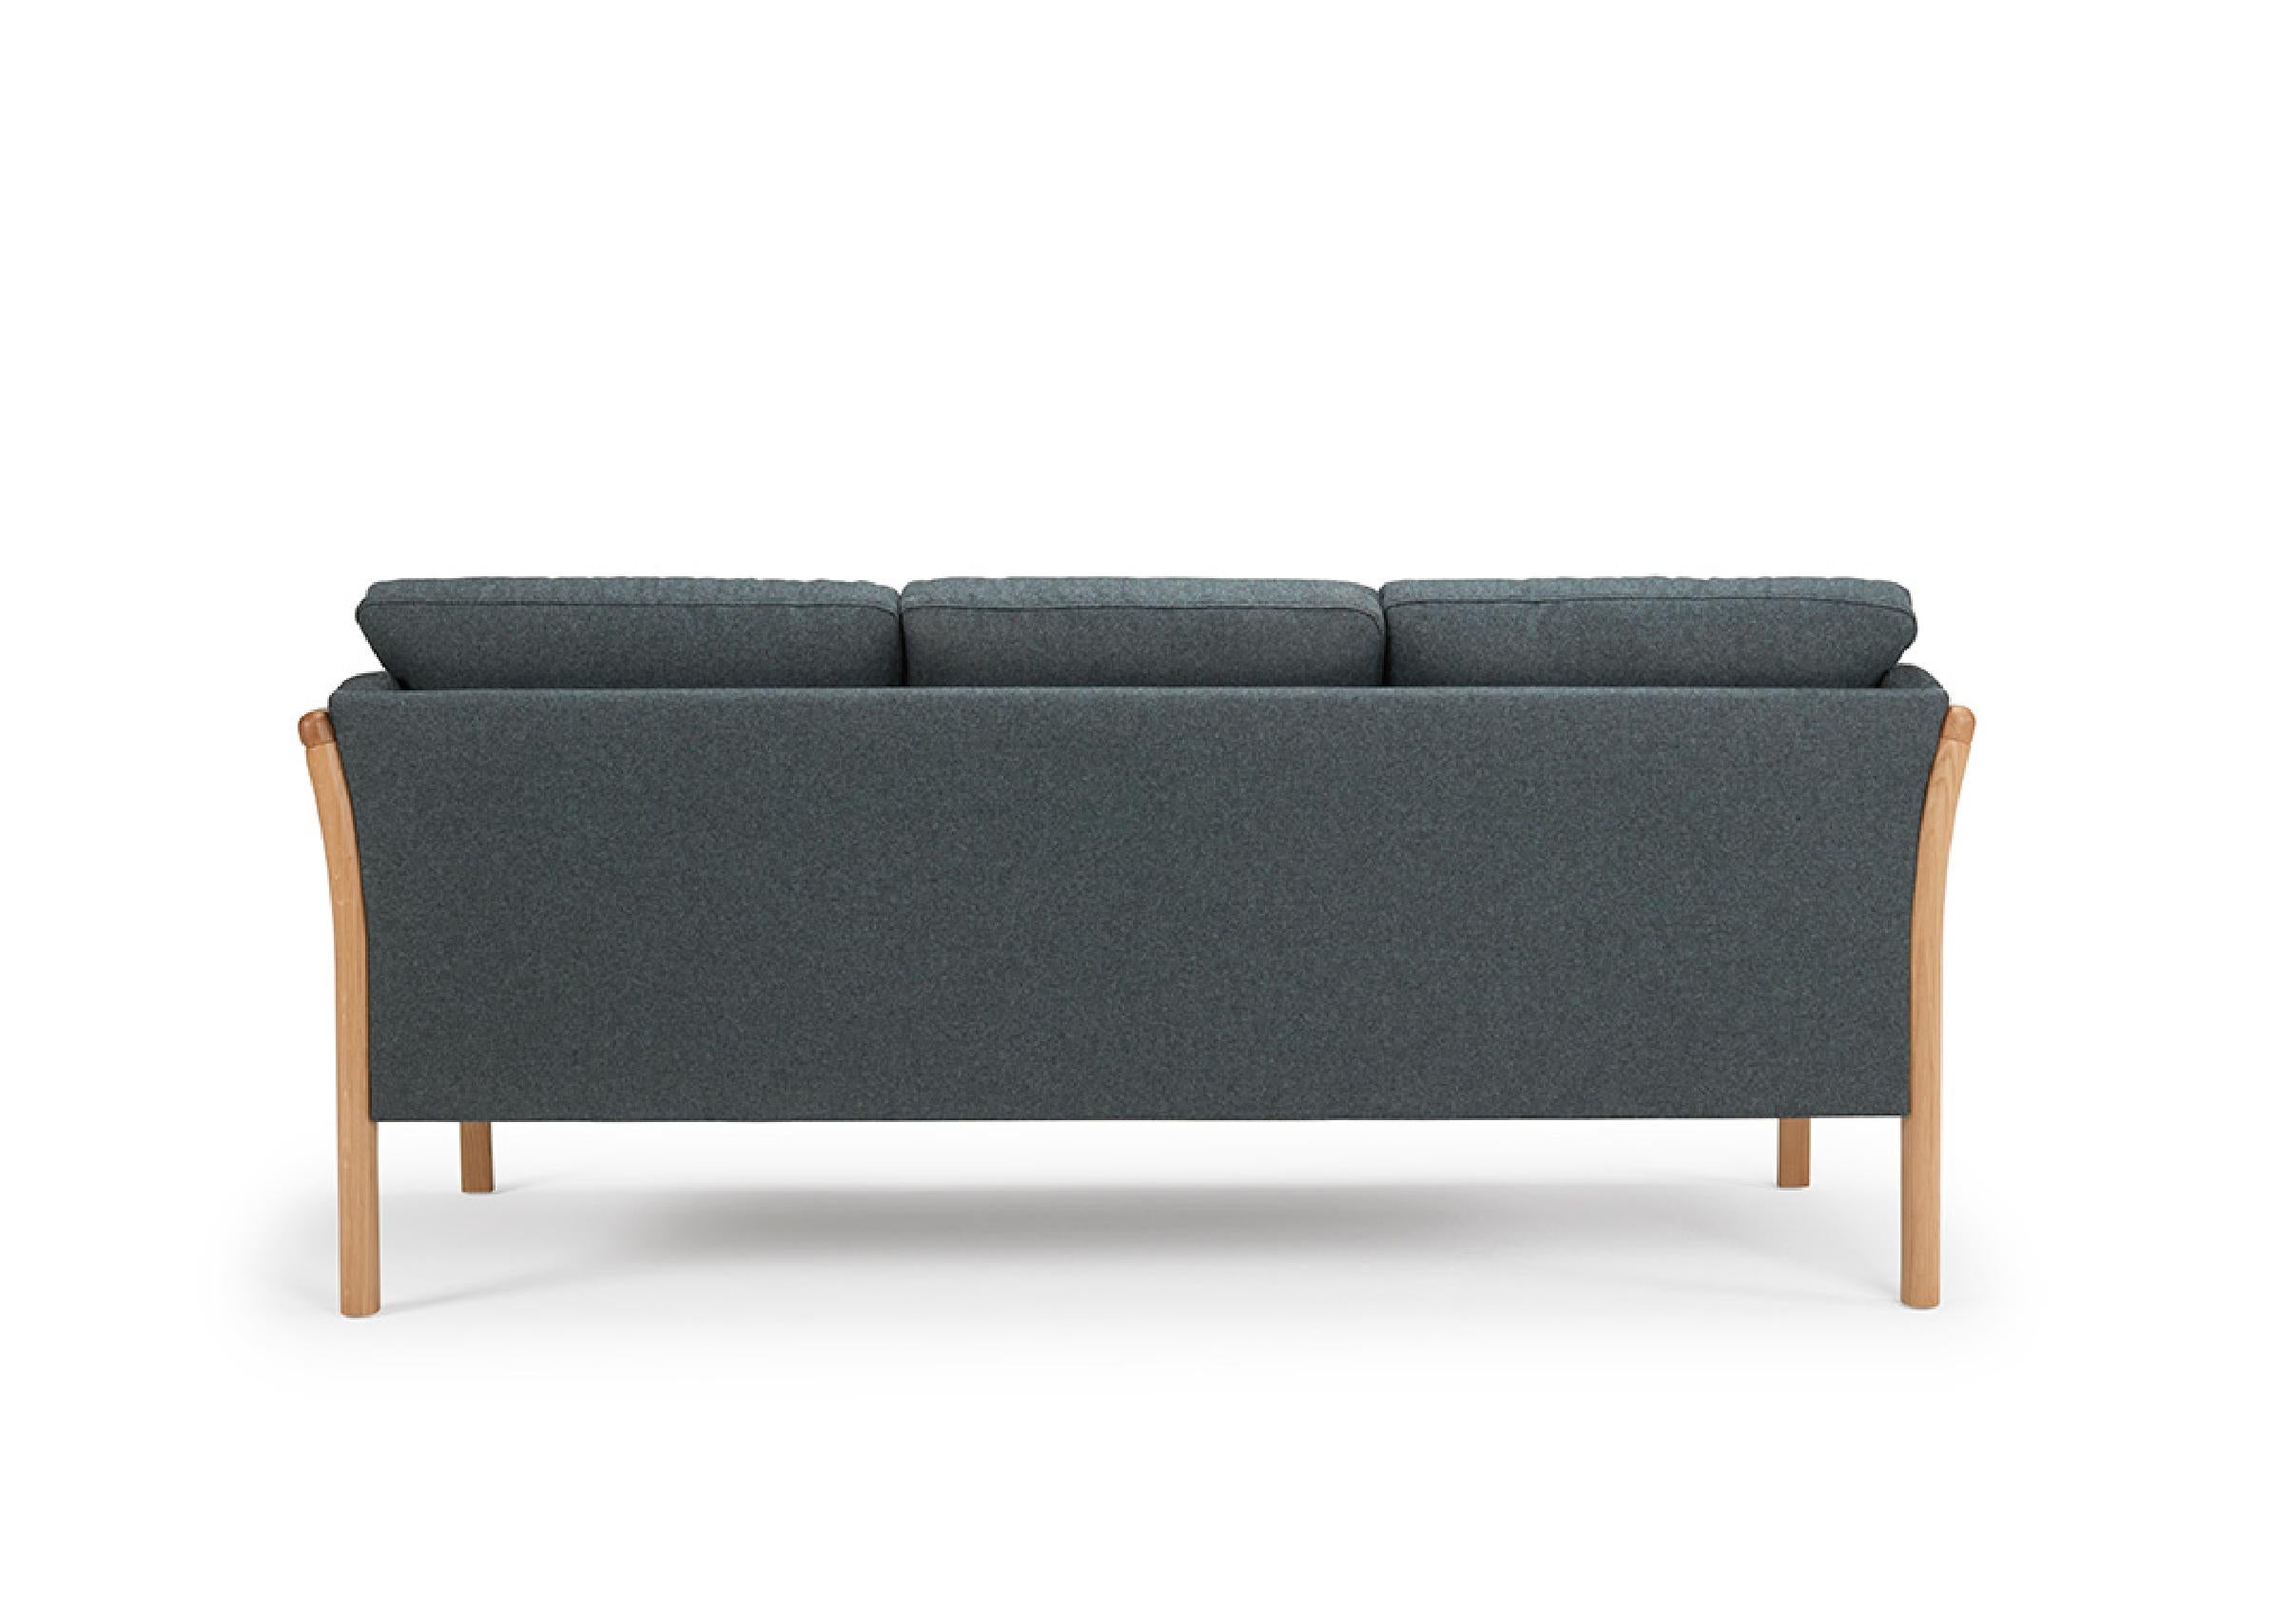 Woodwork Hayche Oscar 3 Seater Sofa - Blue, UK, Made to Order For Sale